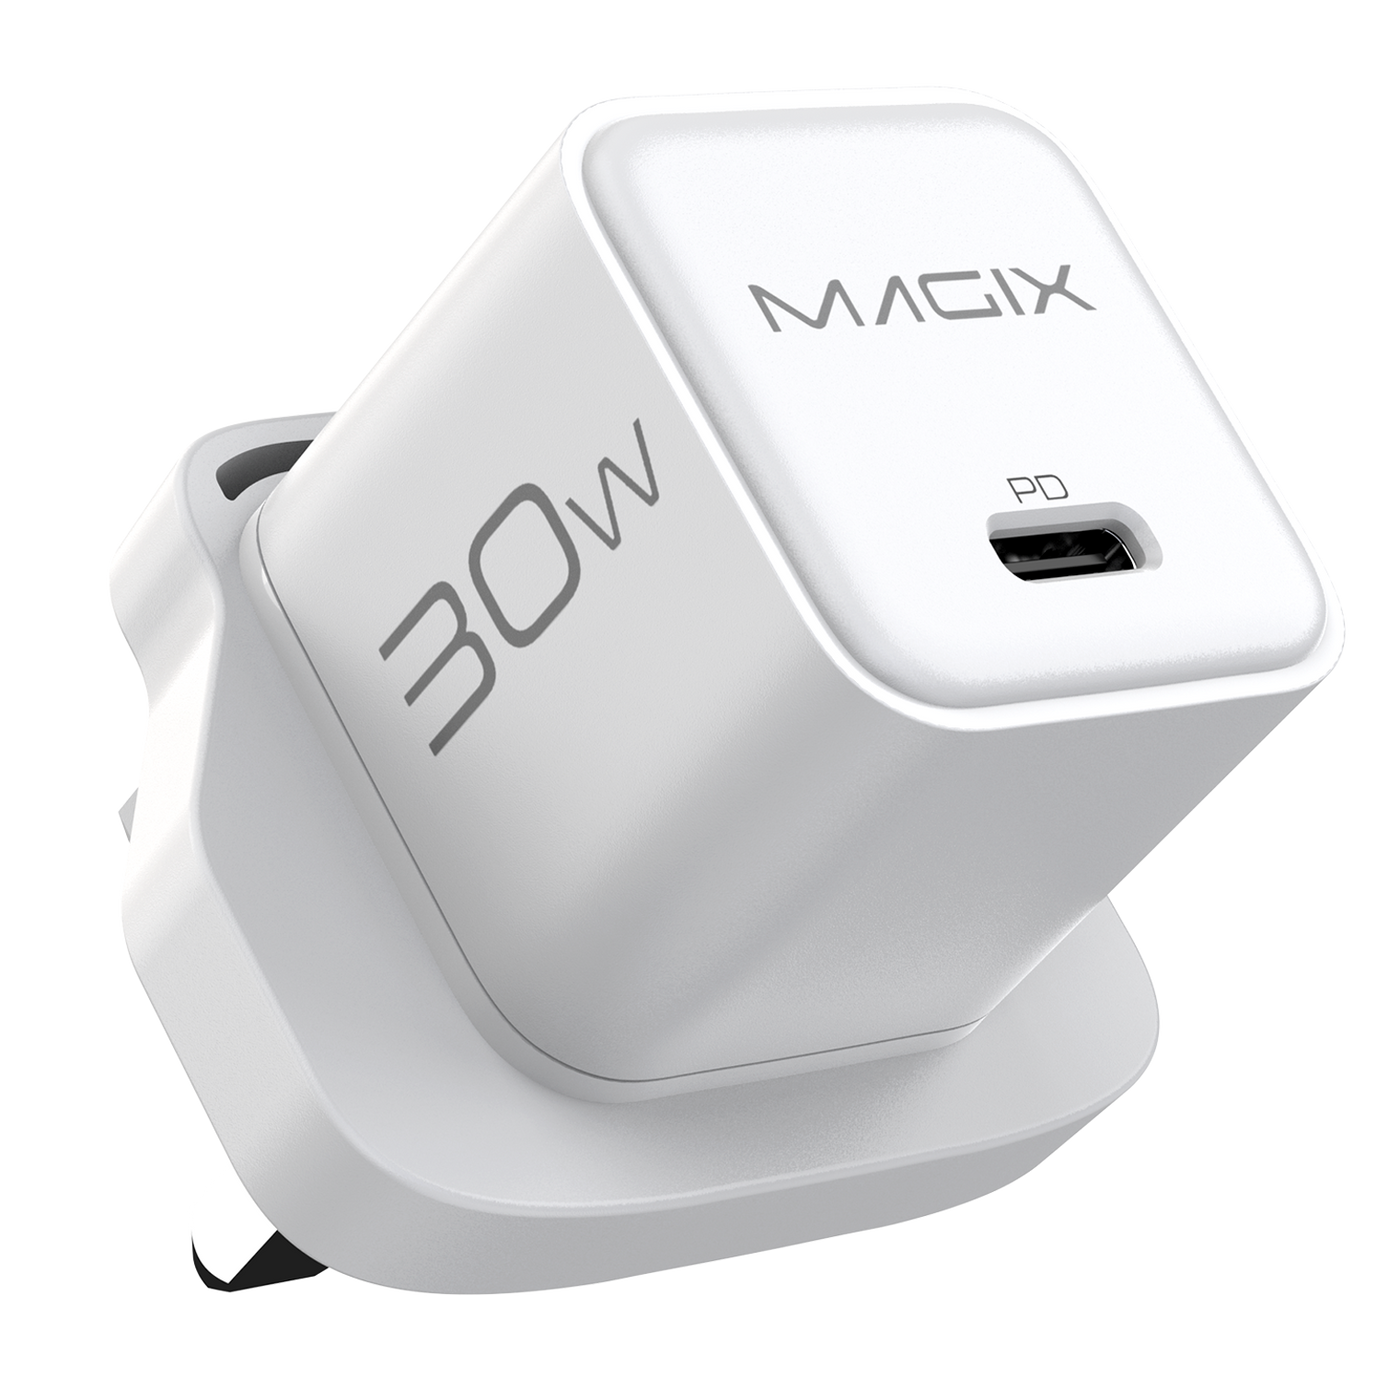 MAGIX 30W NANO GaN Charger PD Power Delivery - UK Plug (WHITE)